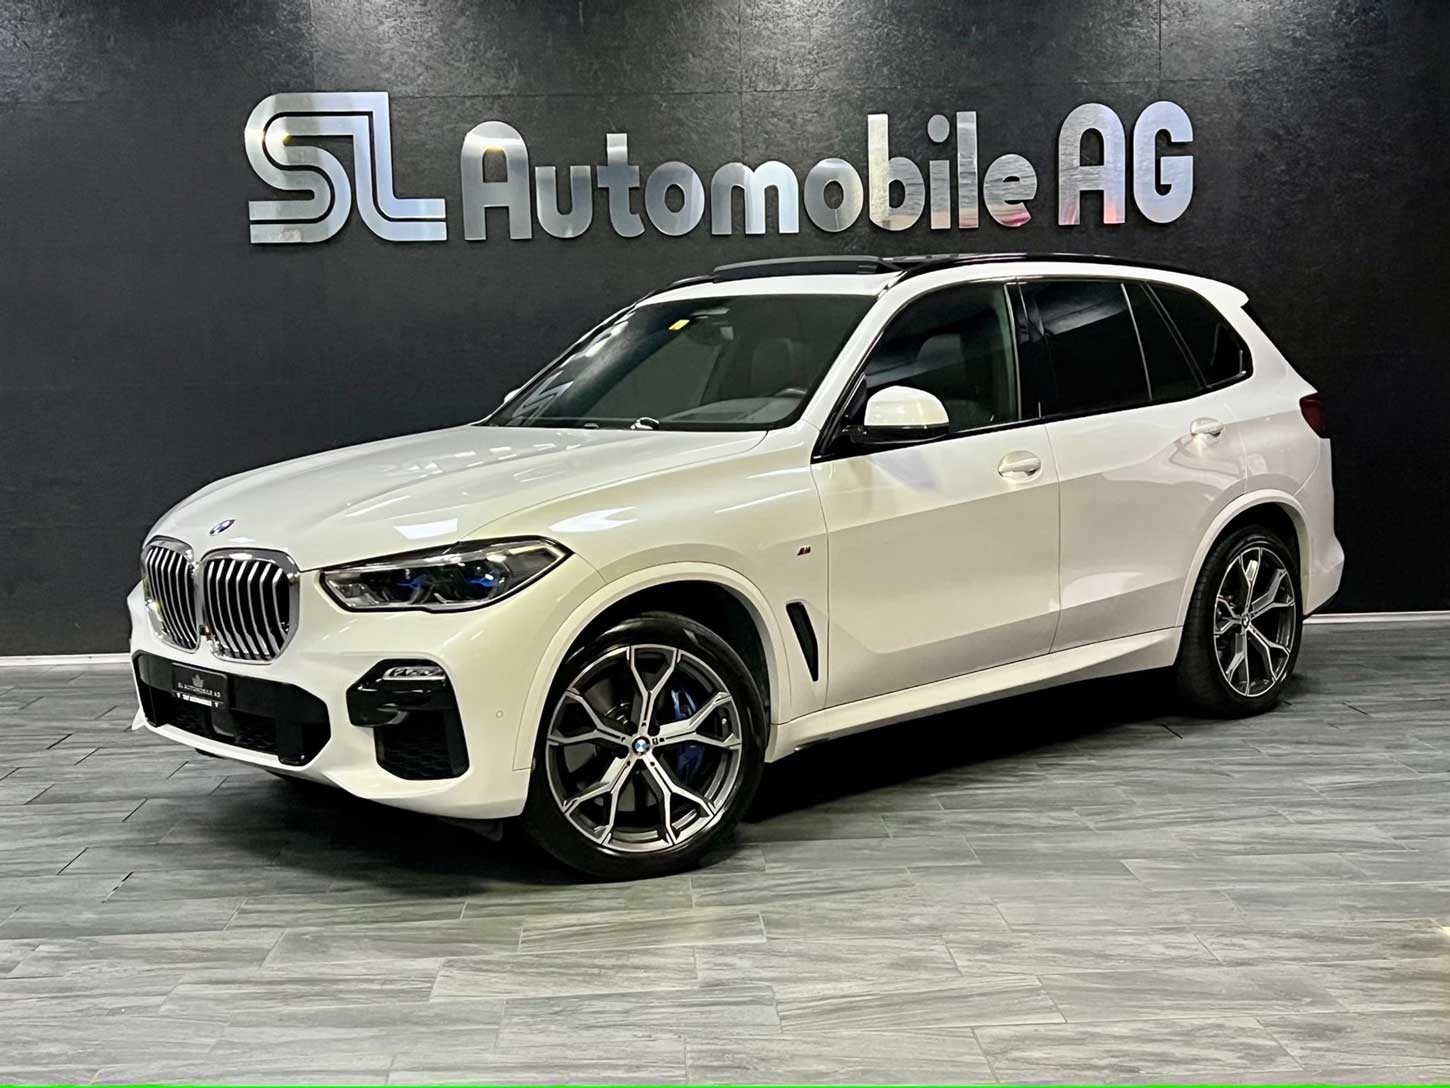 <a href="https://www.autoscout24.ch/de/d/bmw-x5-xdrive-30d-steptronic-10357038?slide=1" style="color: white; text-decoration: none;" onmouseover="this.style.color='yellow'" onmouseout="this.style.color='white'">BMW X5 xDrive 30d Steptronic</a>